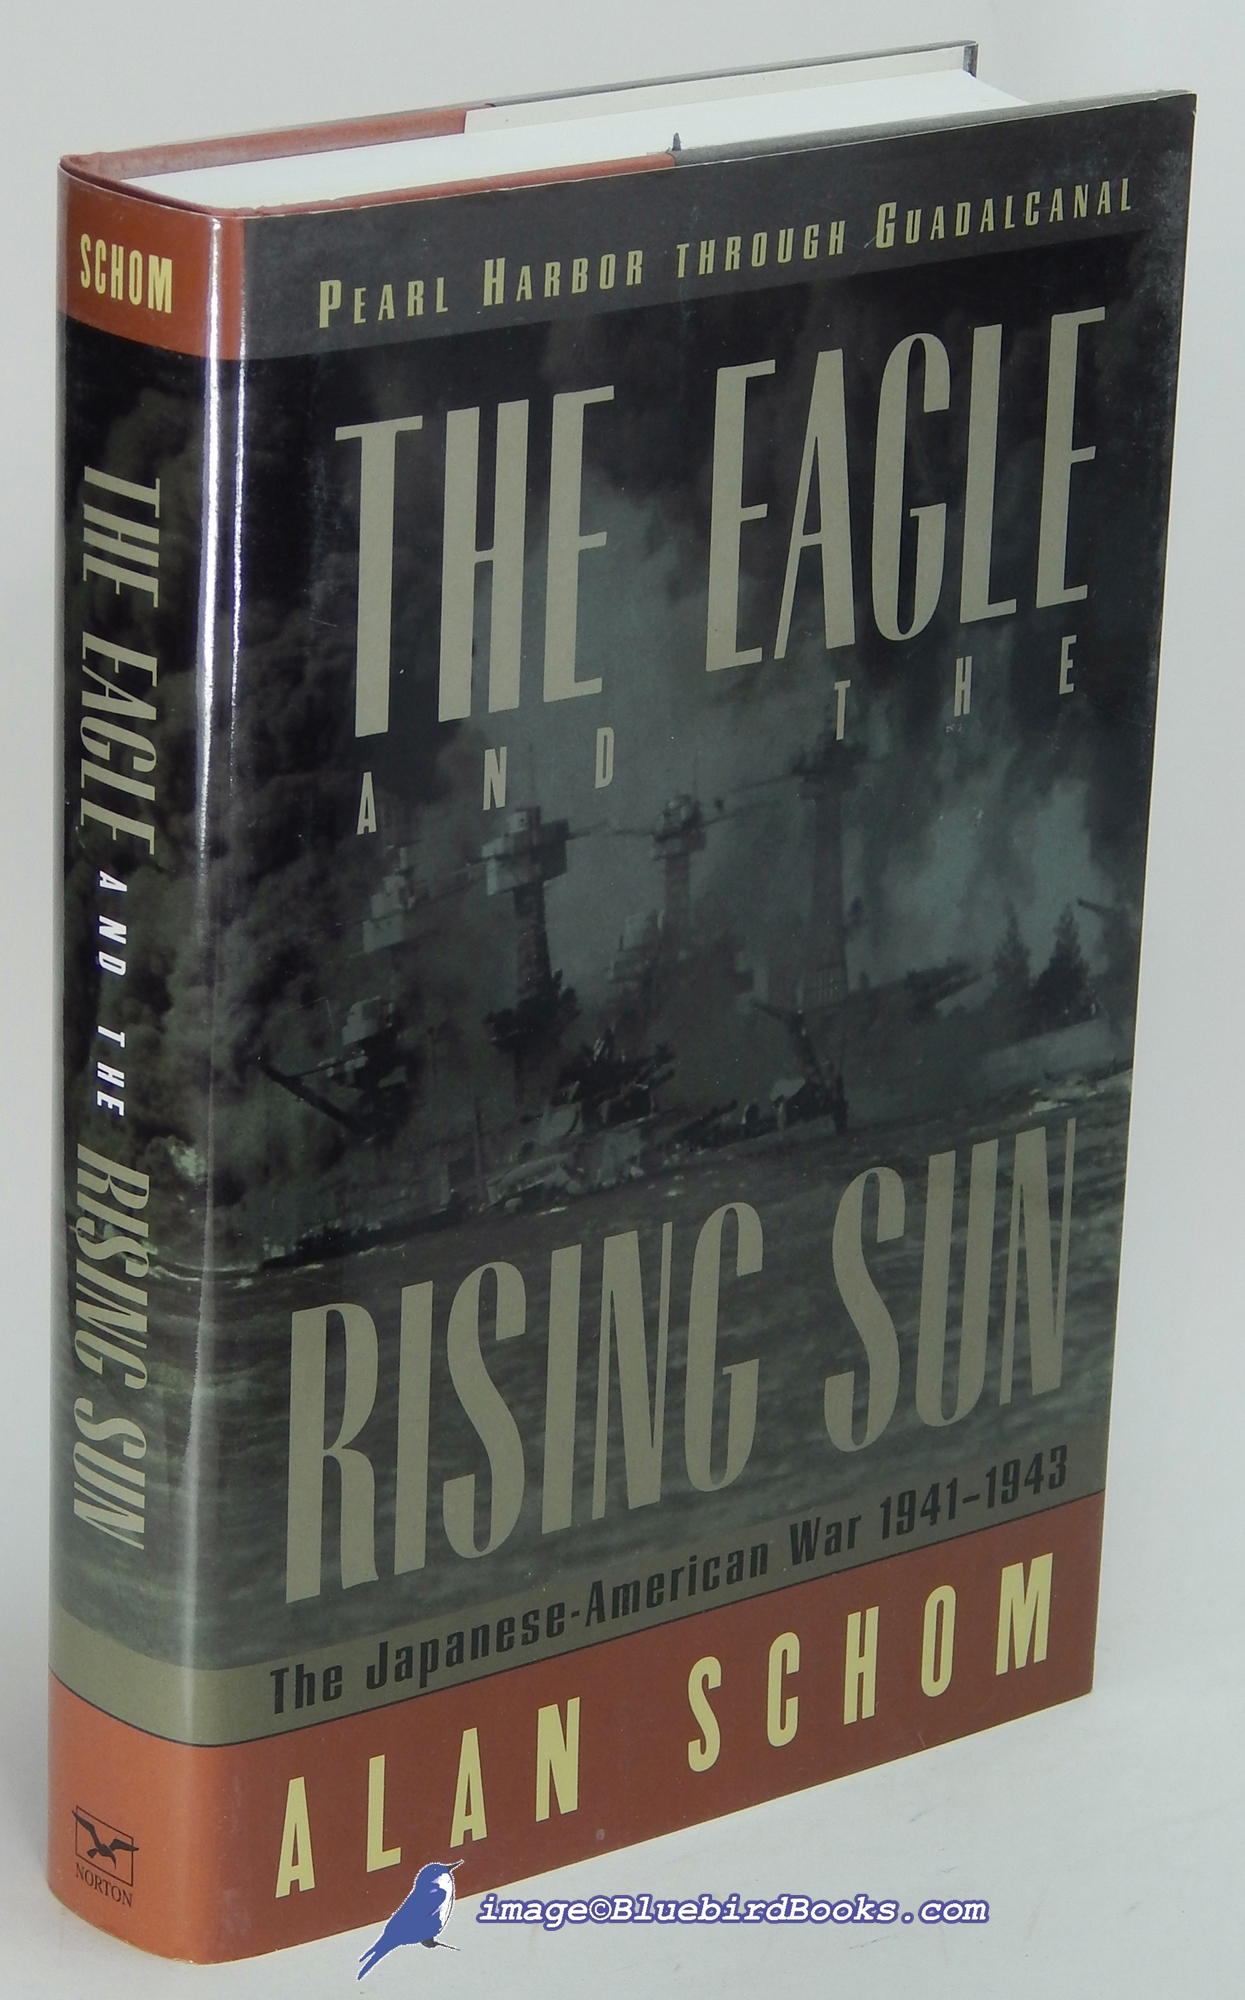 SCHOM, ALAN - The Eagle and the Rising Sun: The Japanese-American War 1941-1943, Pearl Harbor Through Guadalcanal